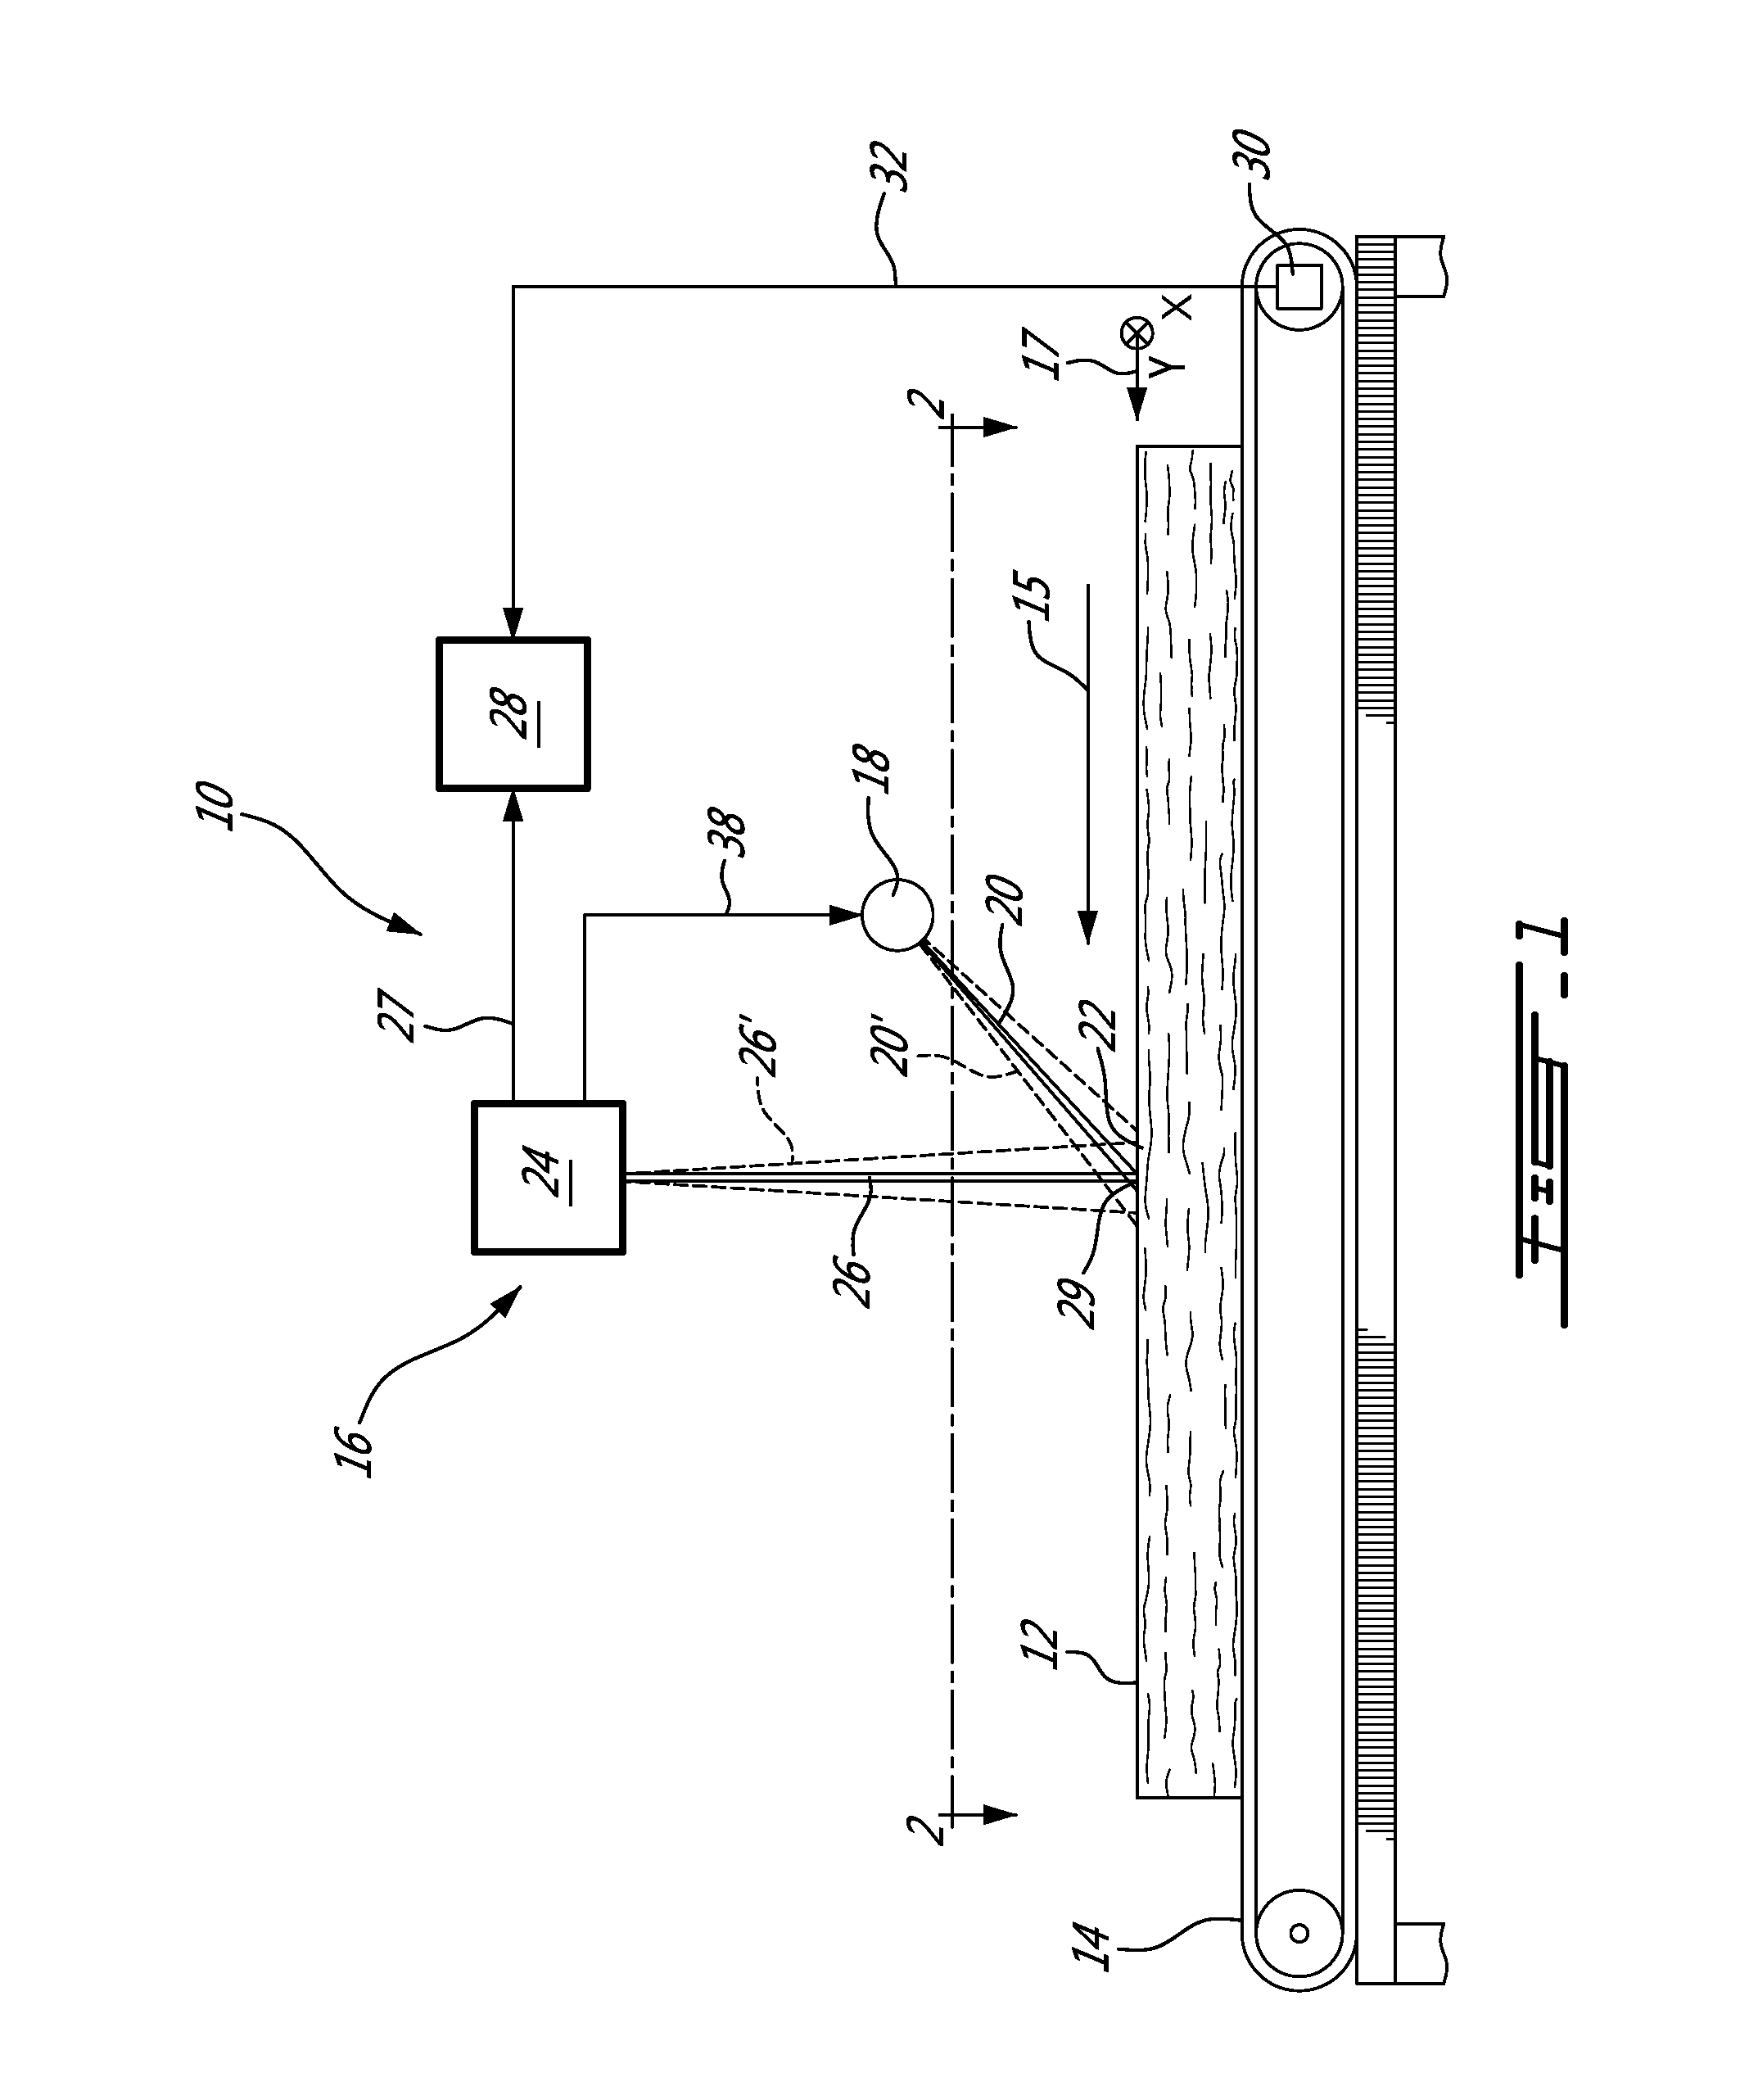 Optical method and apparatus for identifying wood species of a raw wooden log